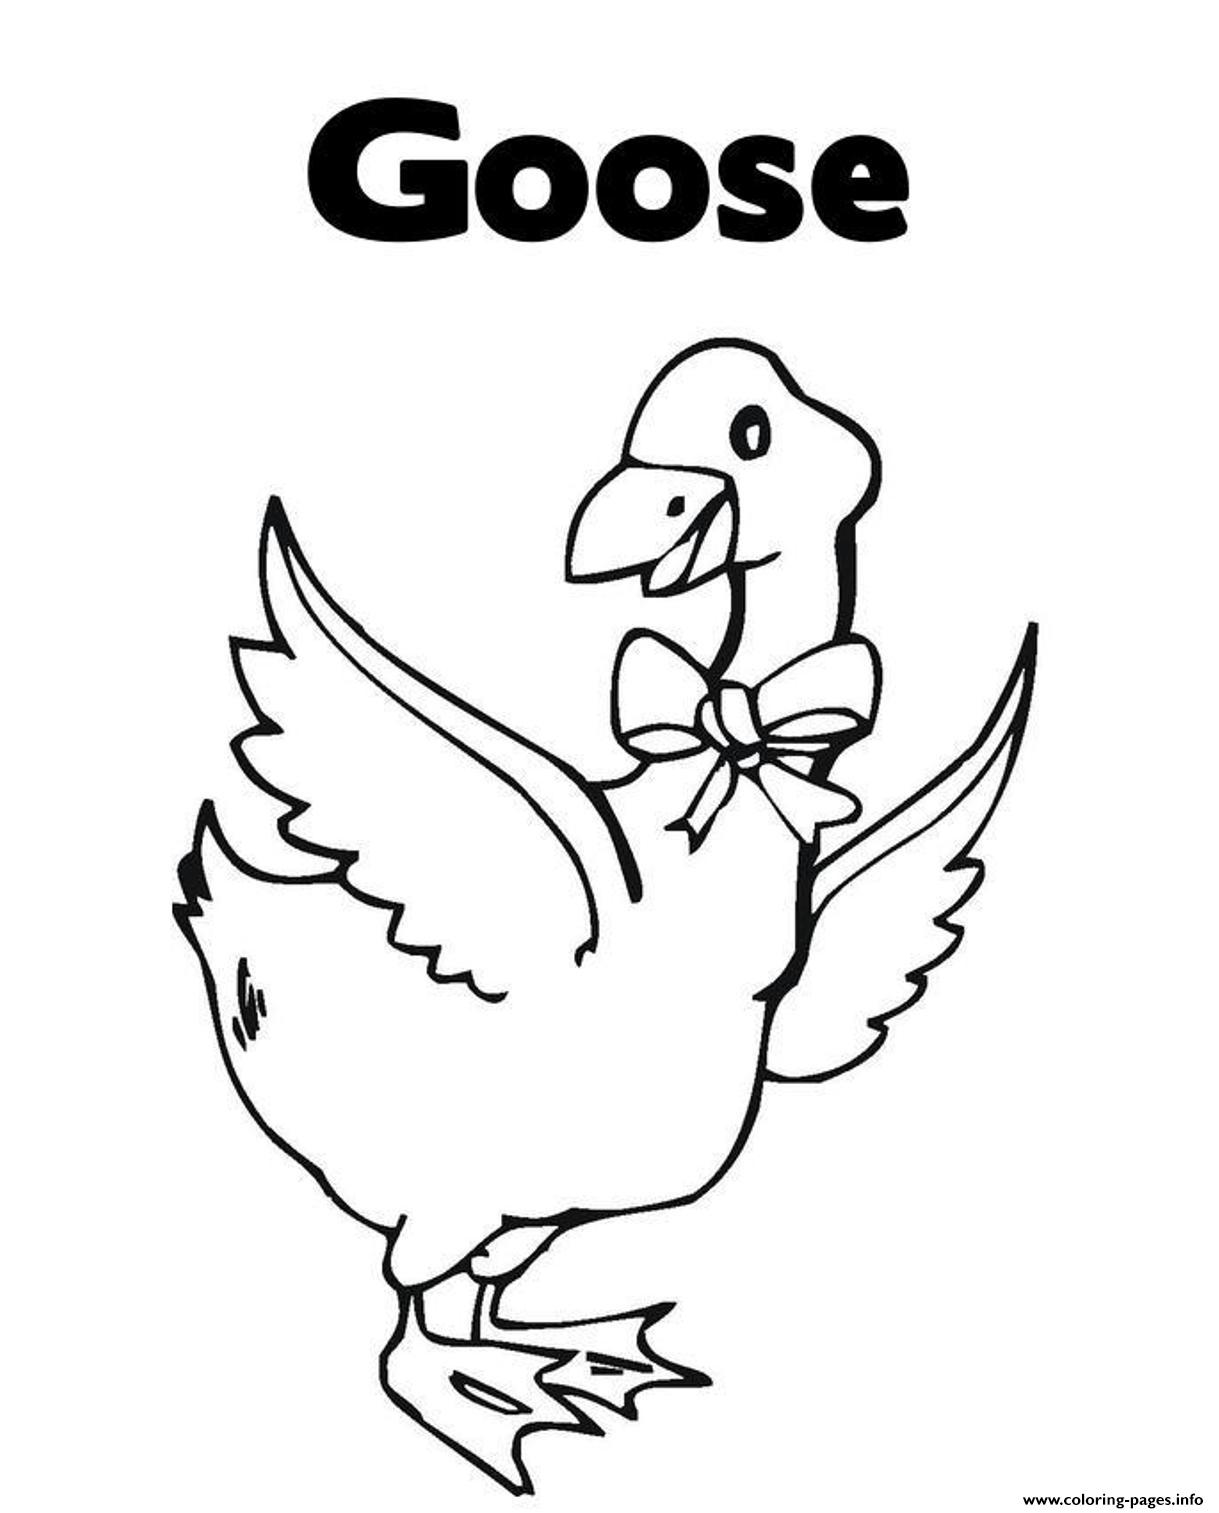 printable-animal-s-goose-for-kids618d-coloring-pages-printable